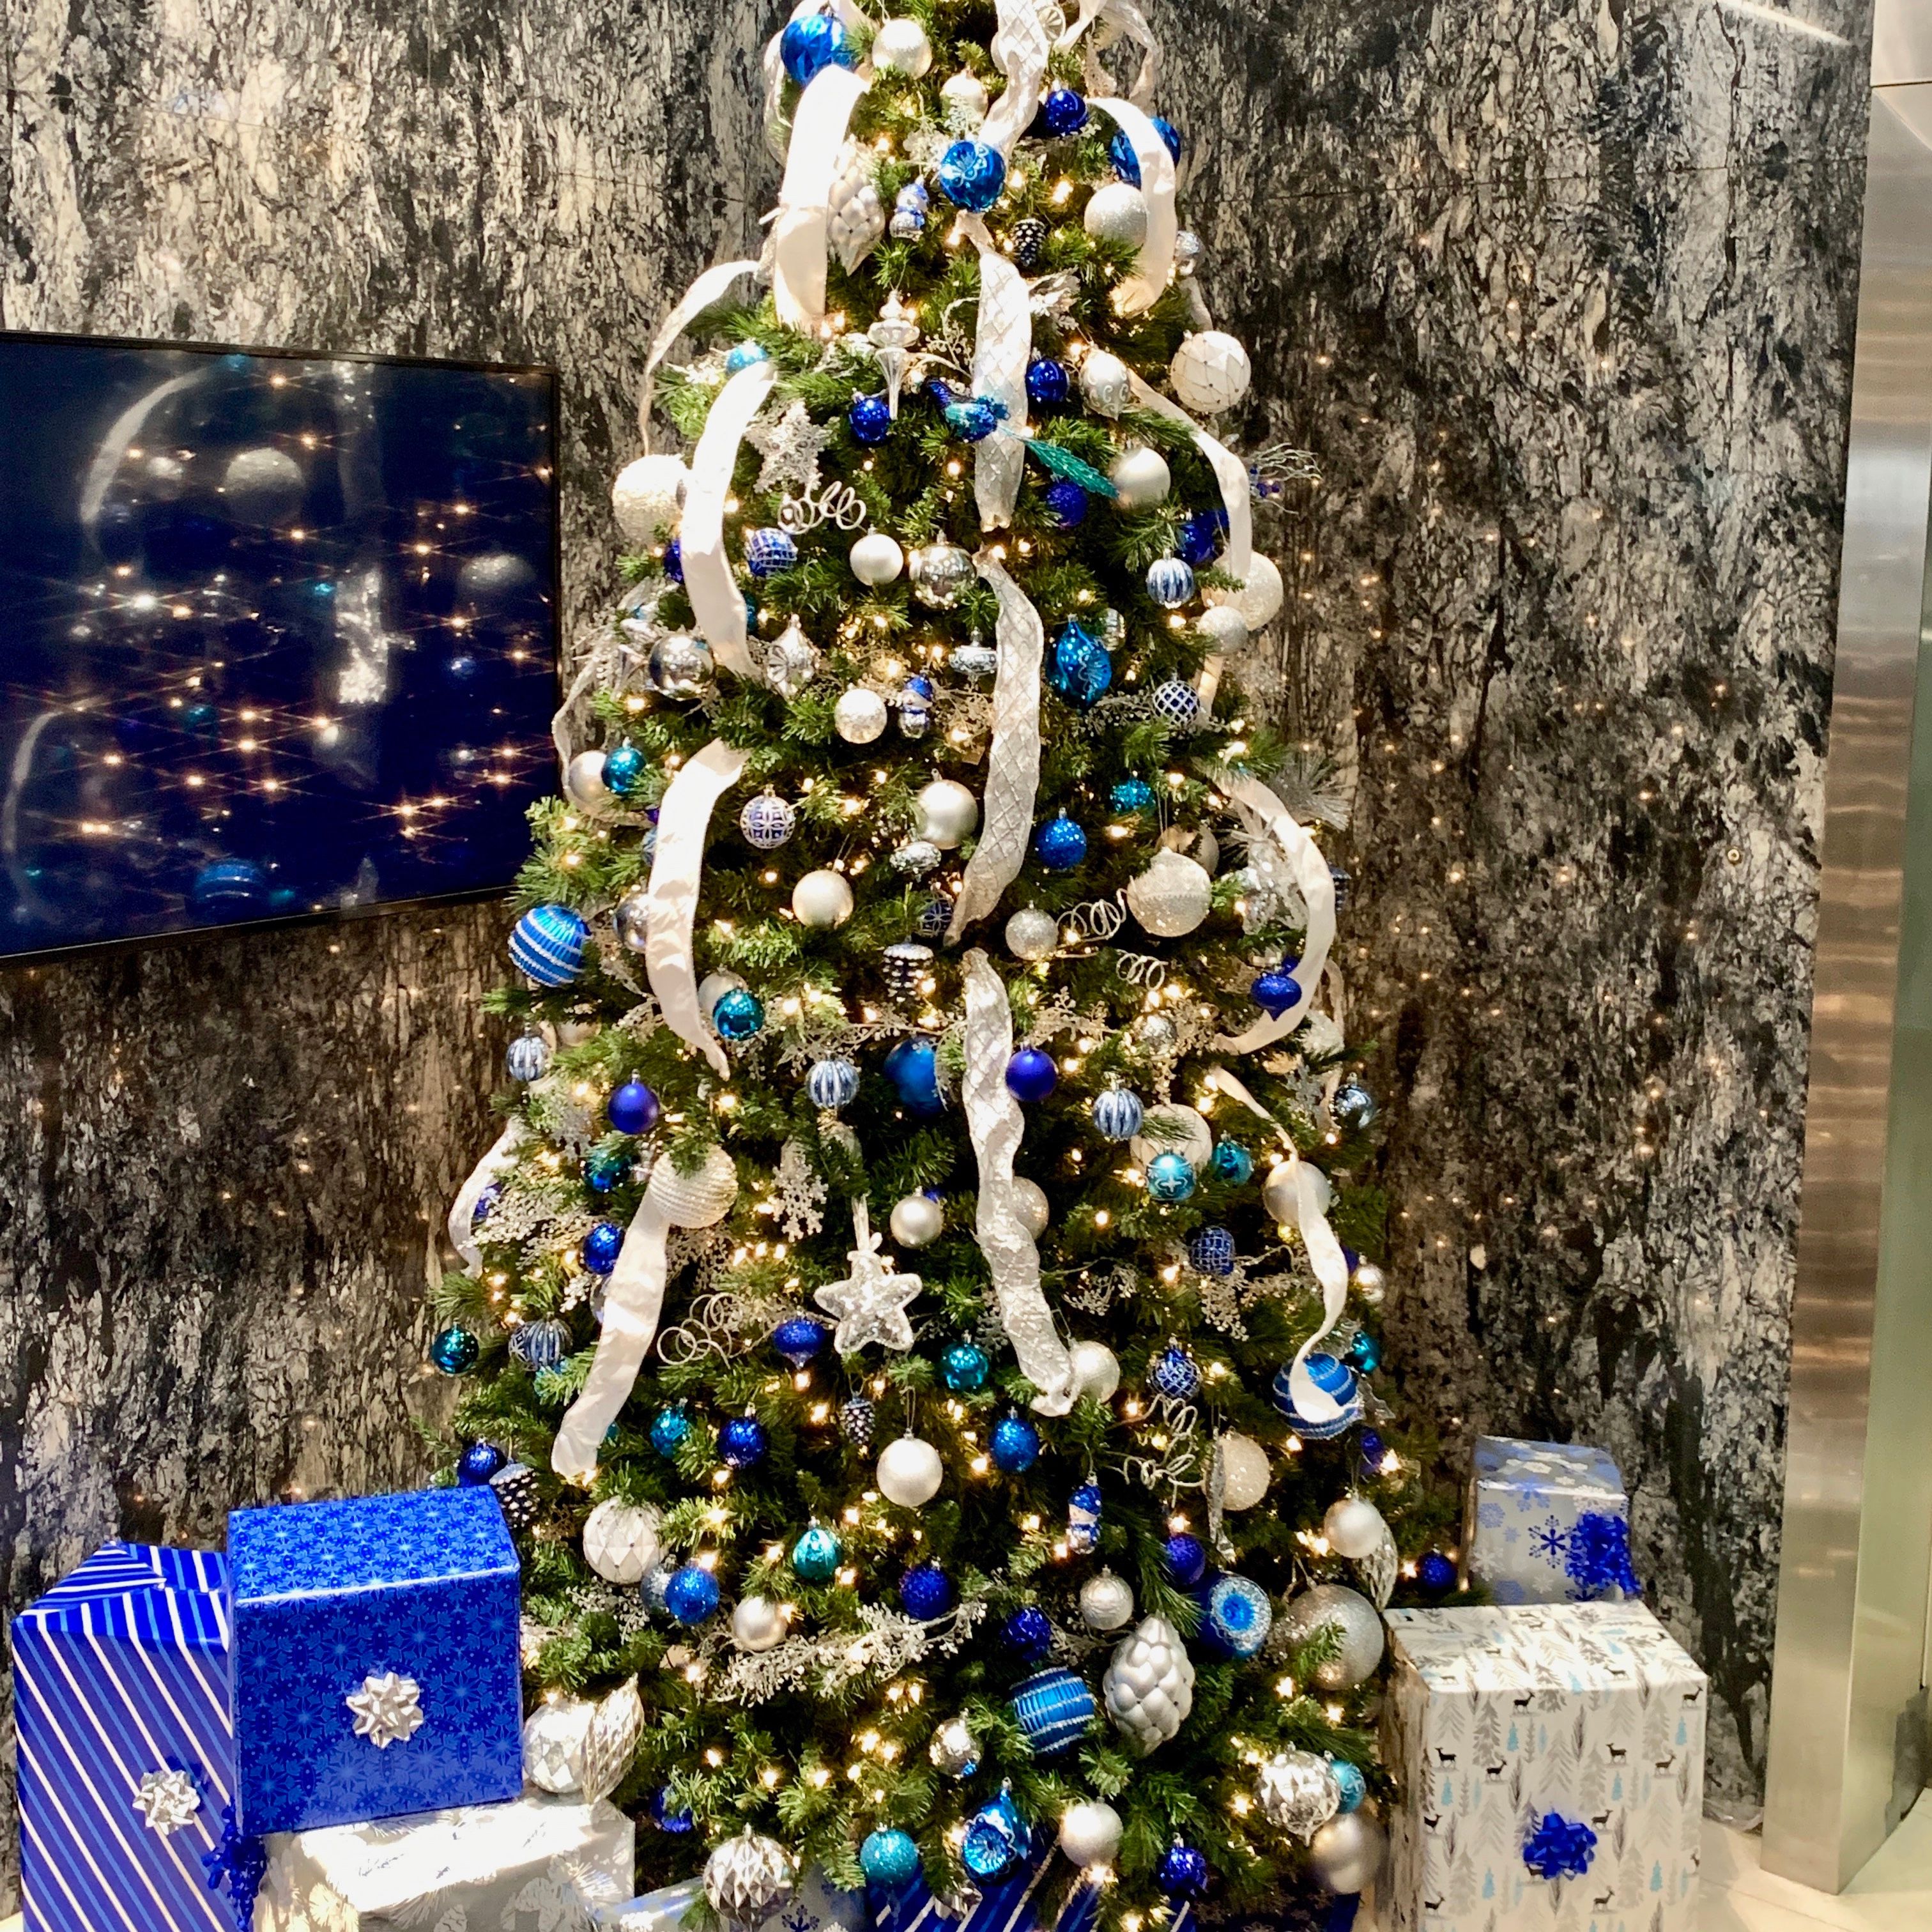 Decorated Christmas tree in building lobby